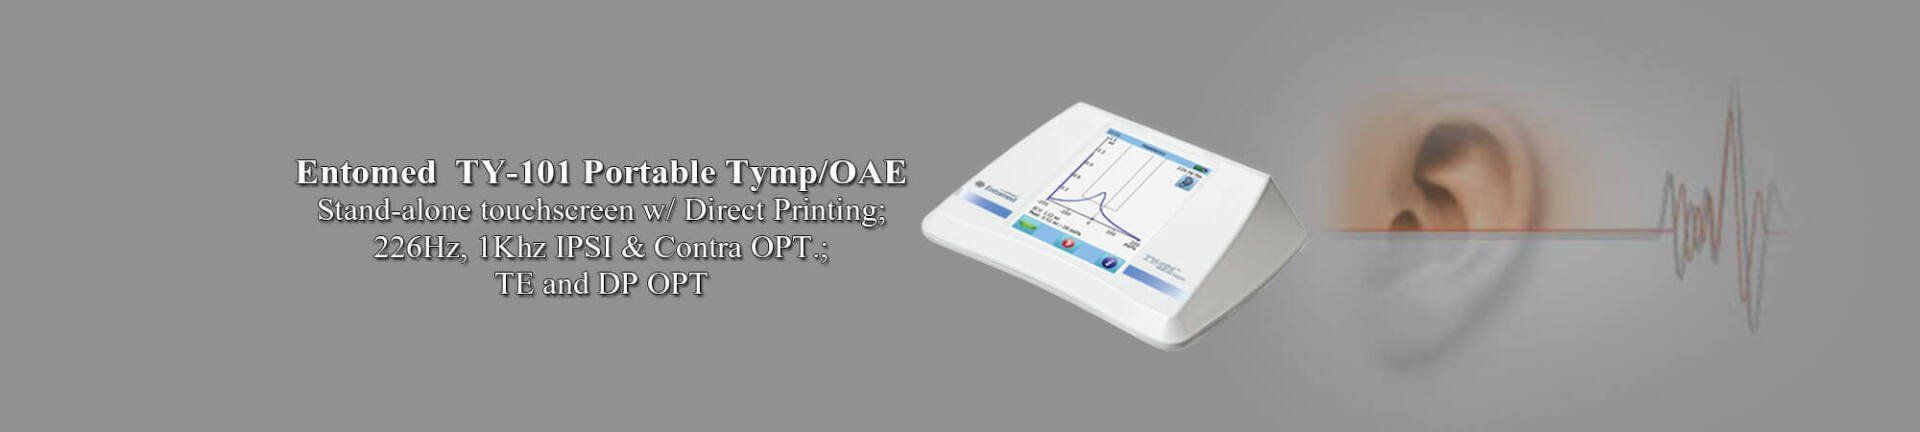 Entomed TY 101 Portable Tymp/OAE